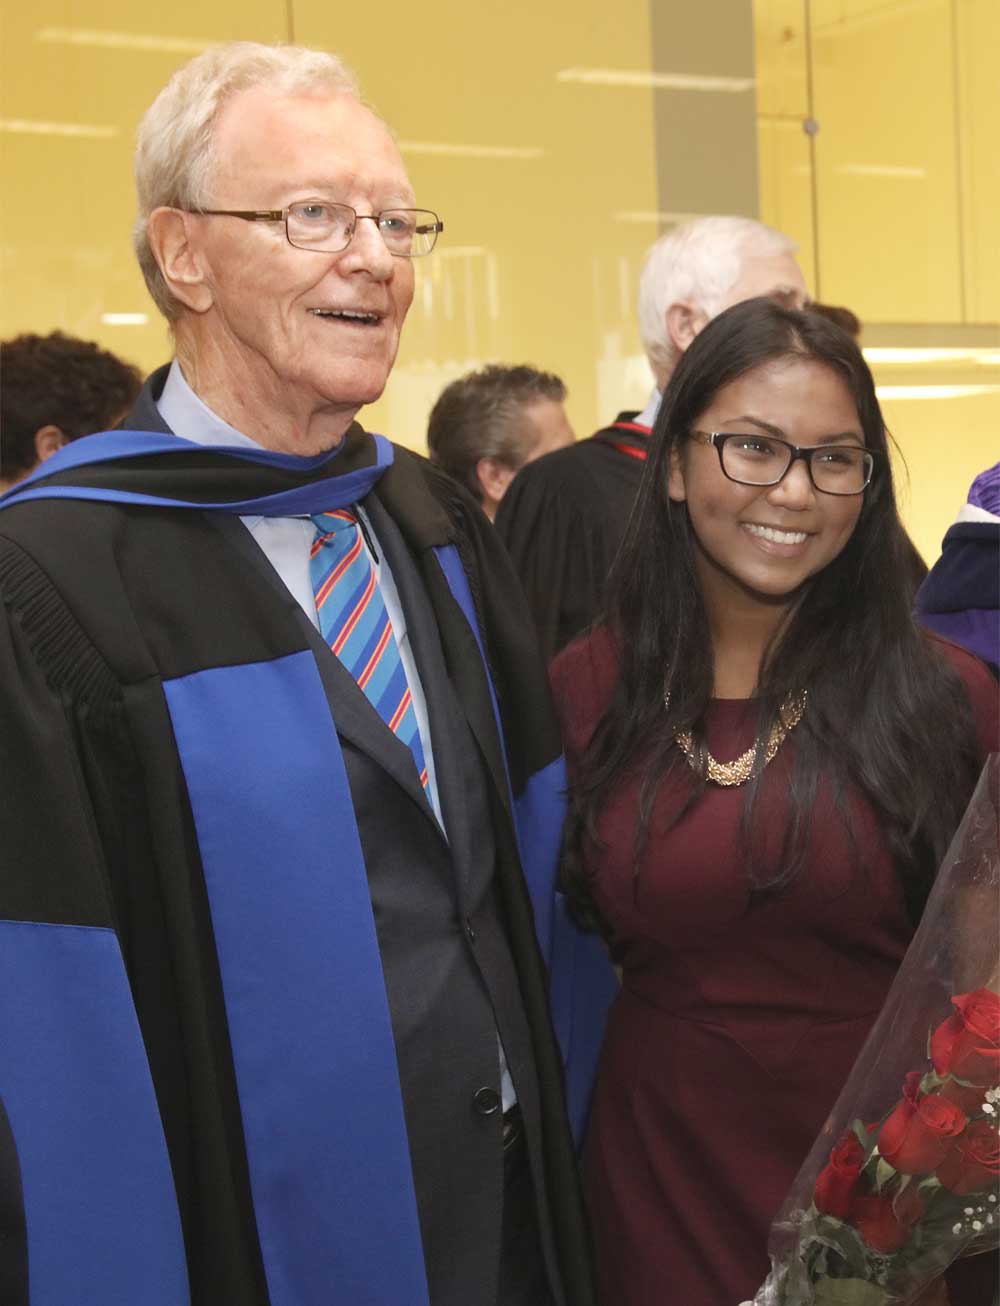 Donald Sobey  at Convocation in May 2016, when he received his honorary Queen’s degree.